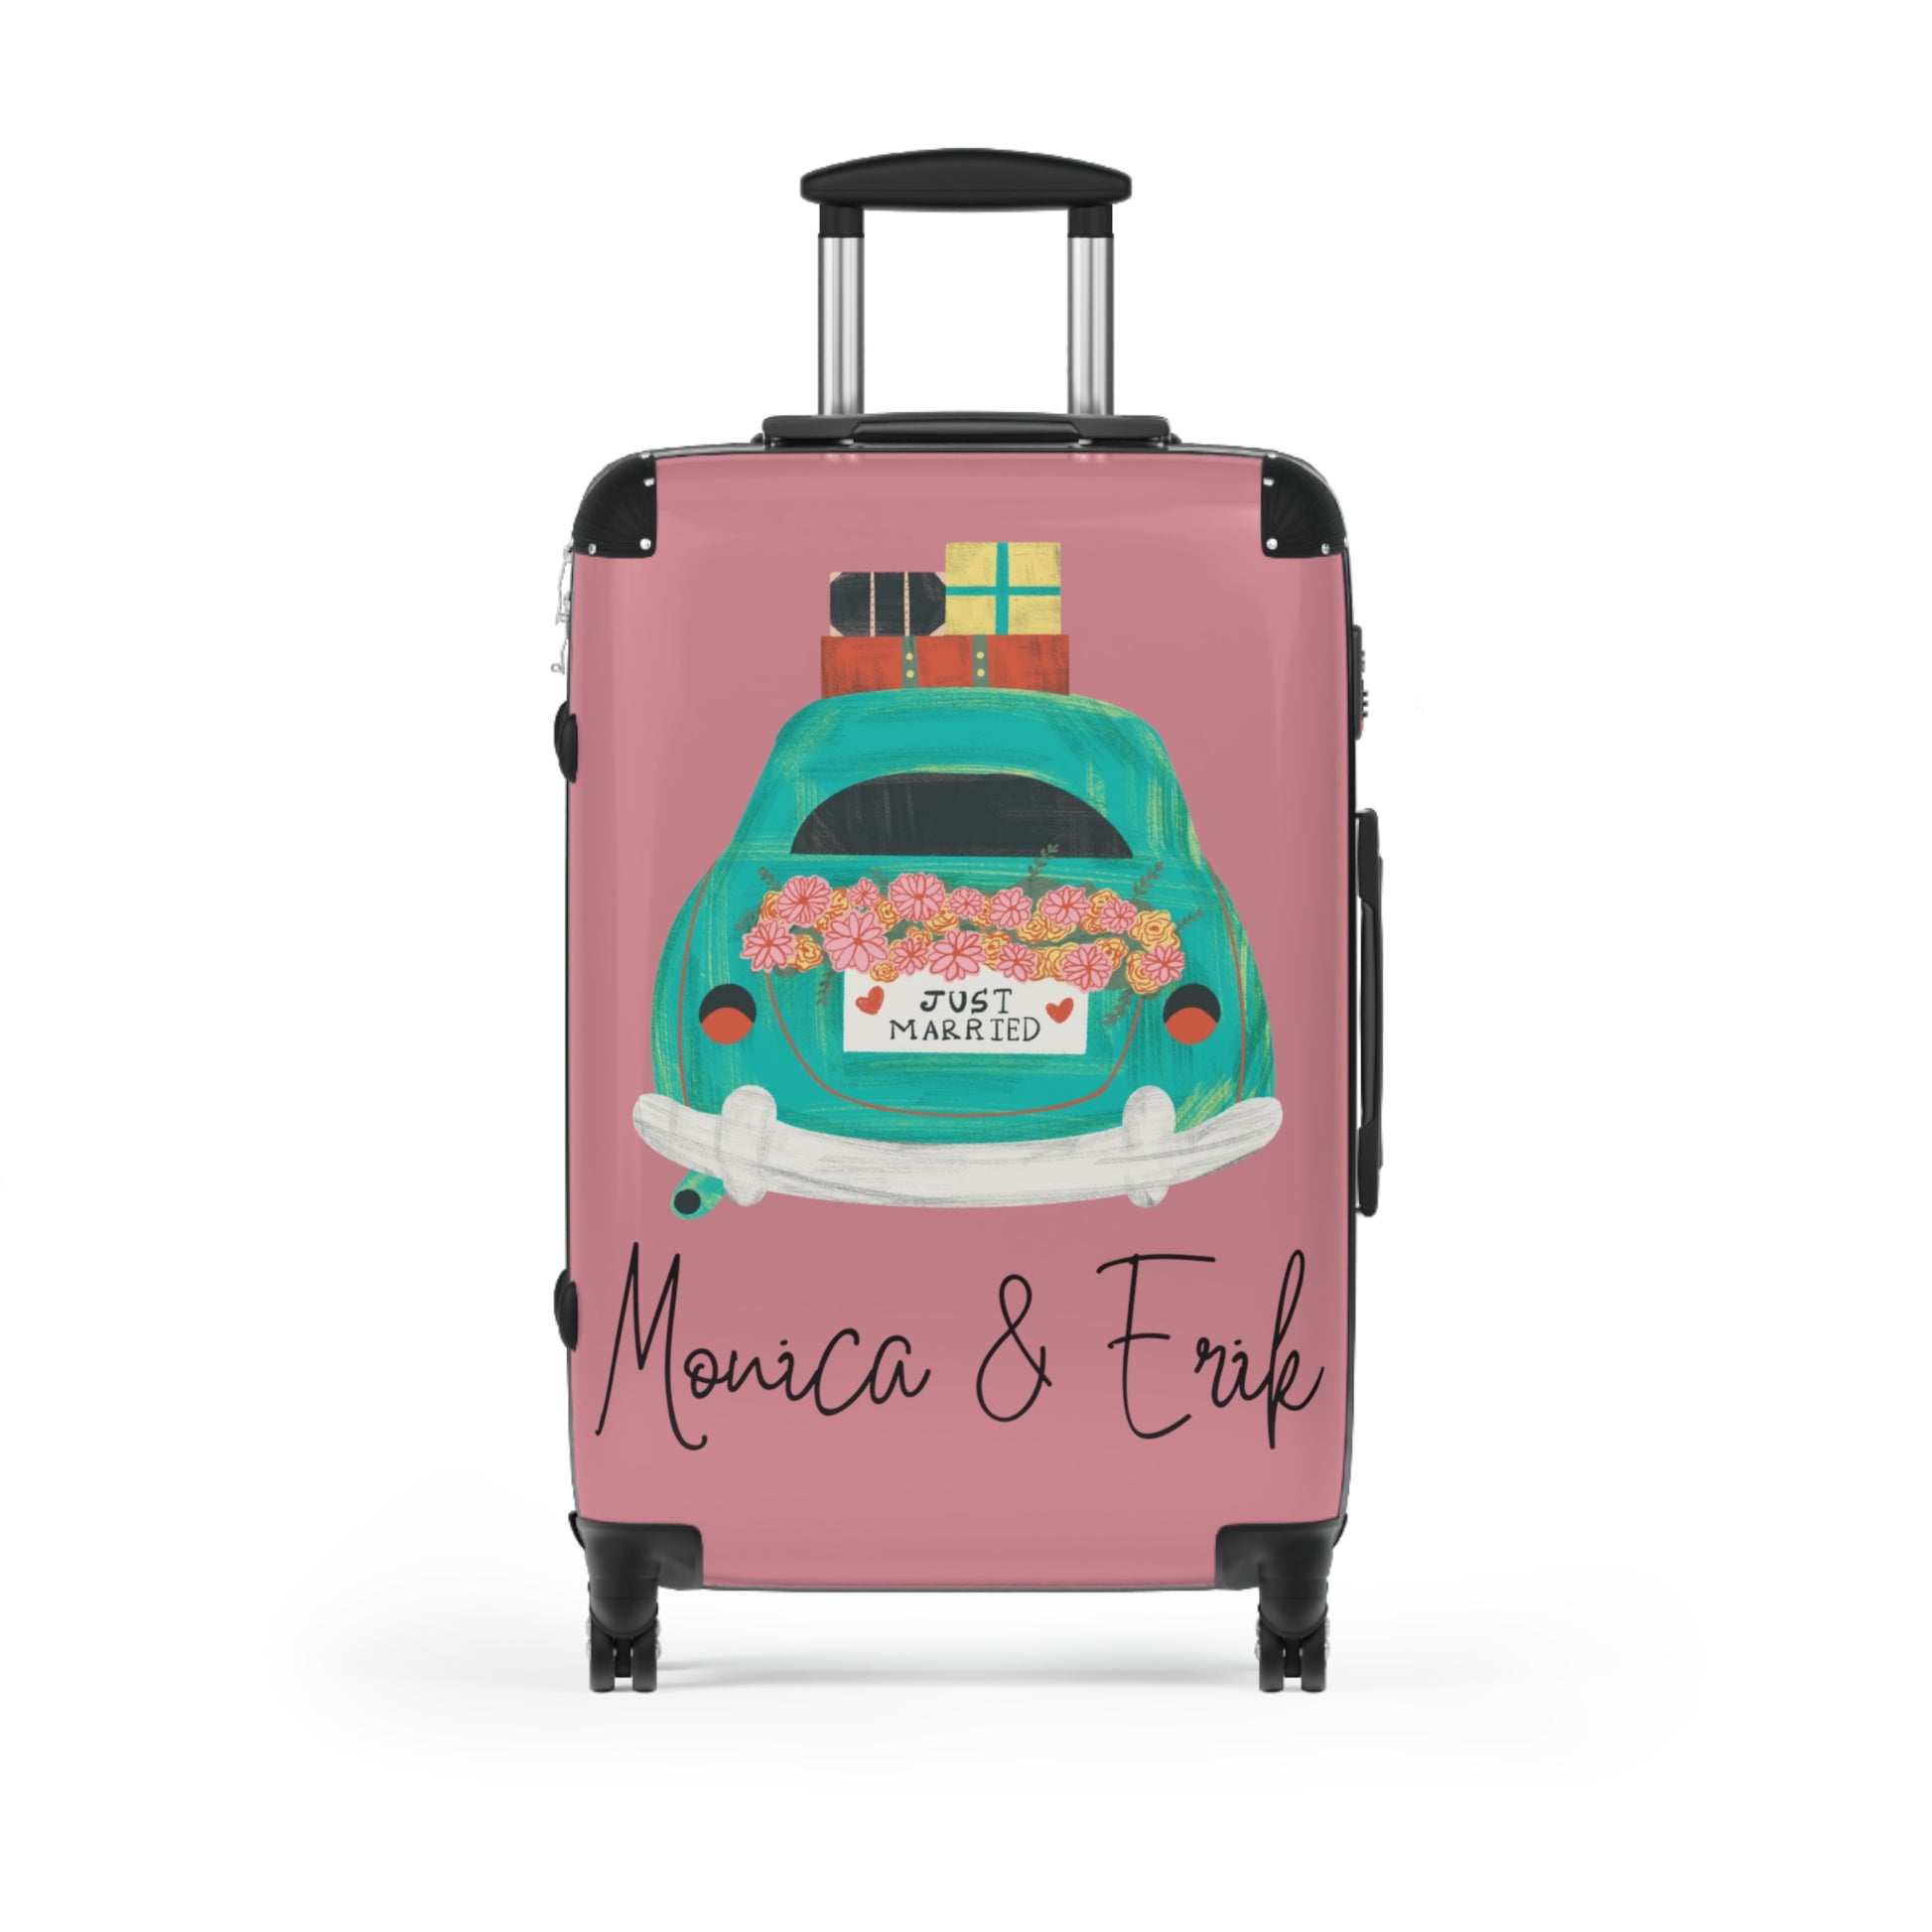 Personalized Suitcase Wedding Gift Bags Brides by Emilia Milan 